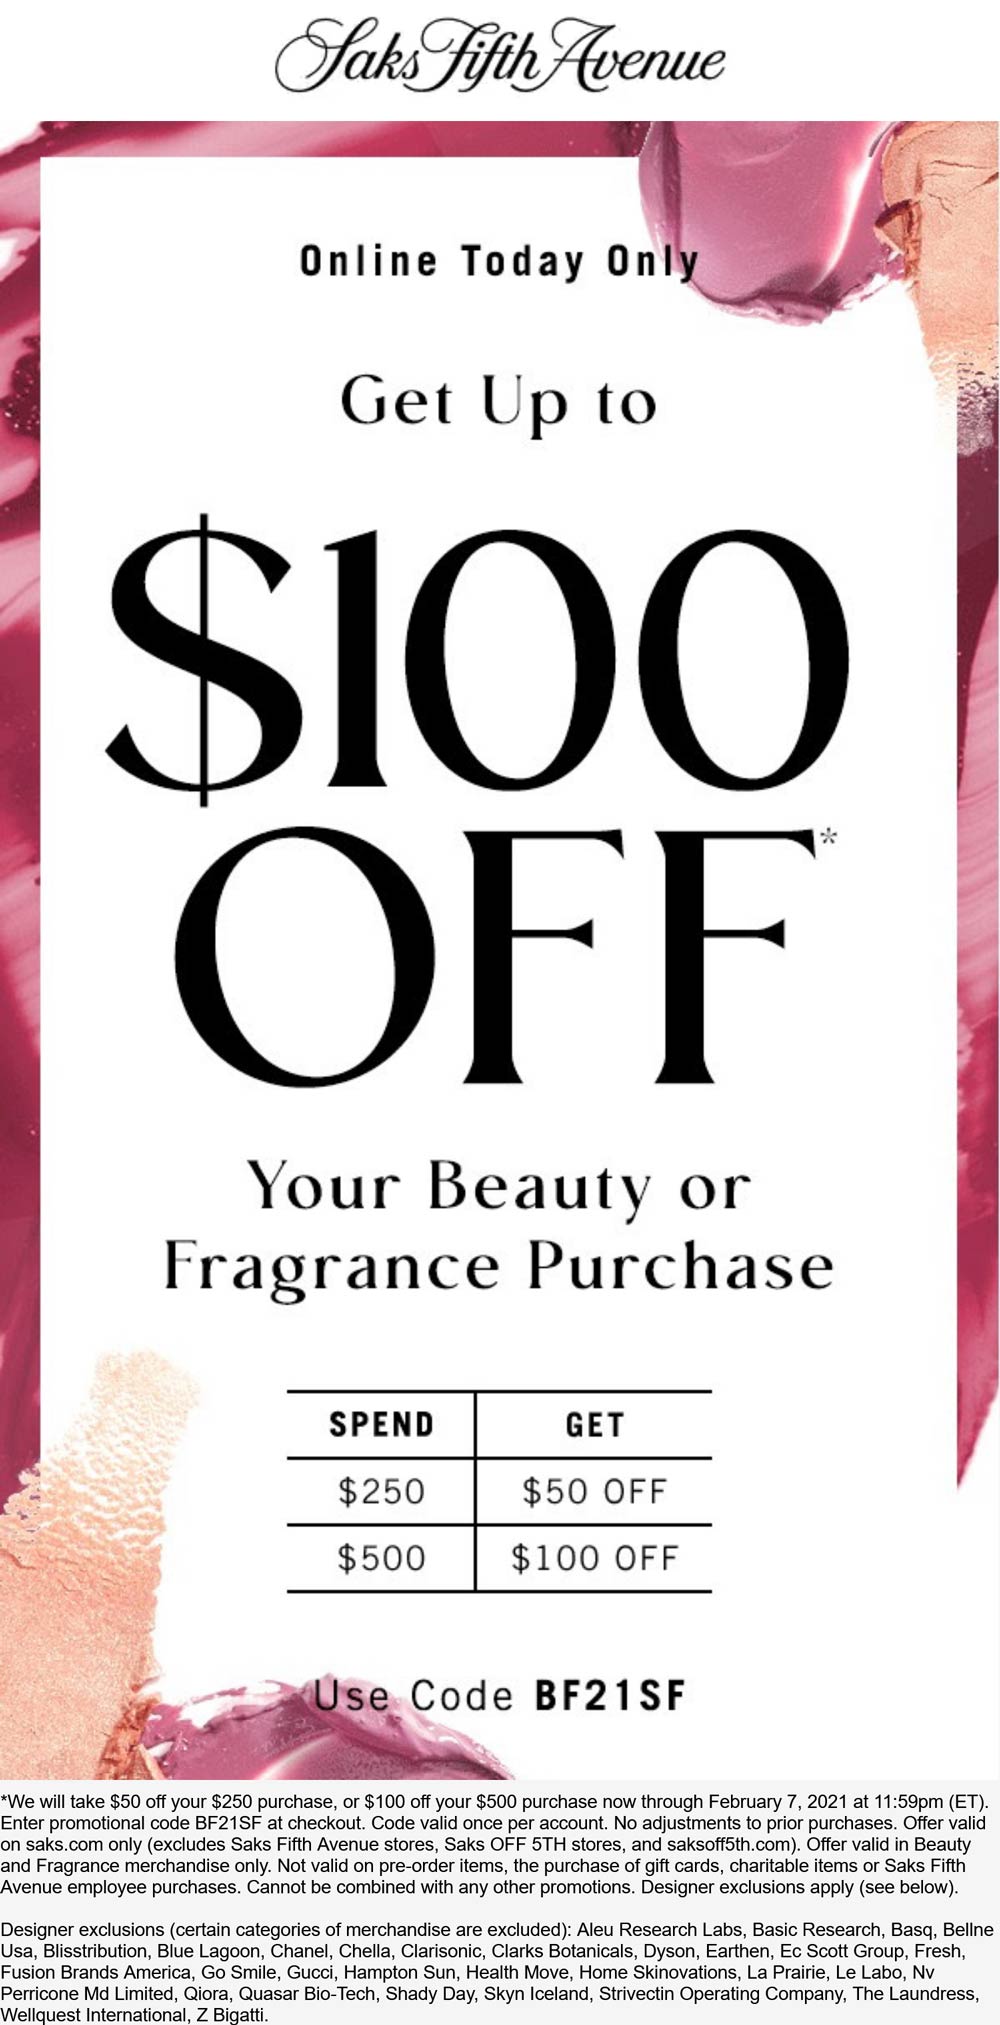 Saks Fifth Avenue stores Coupon  $50-$100 off $250+ on beauty or fragrance today at Saks Fifth Avenue via promo code BF21SF #saksfifthavenue 